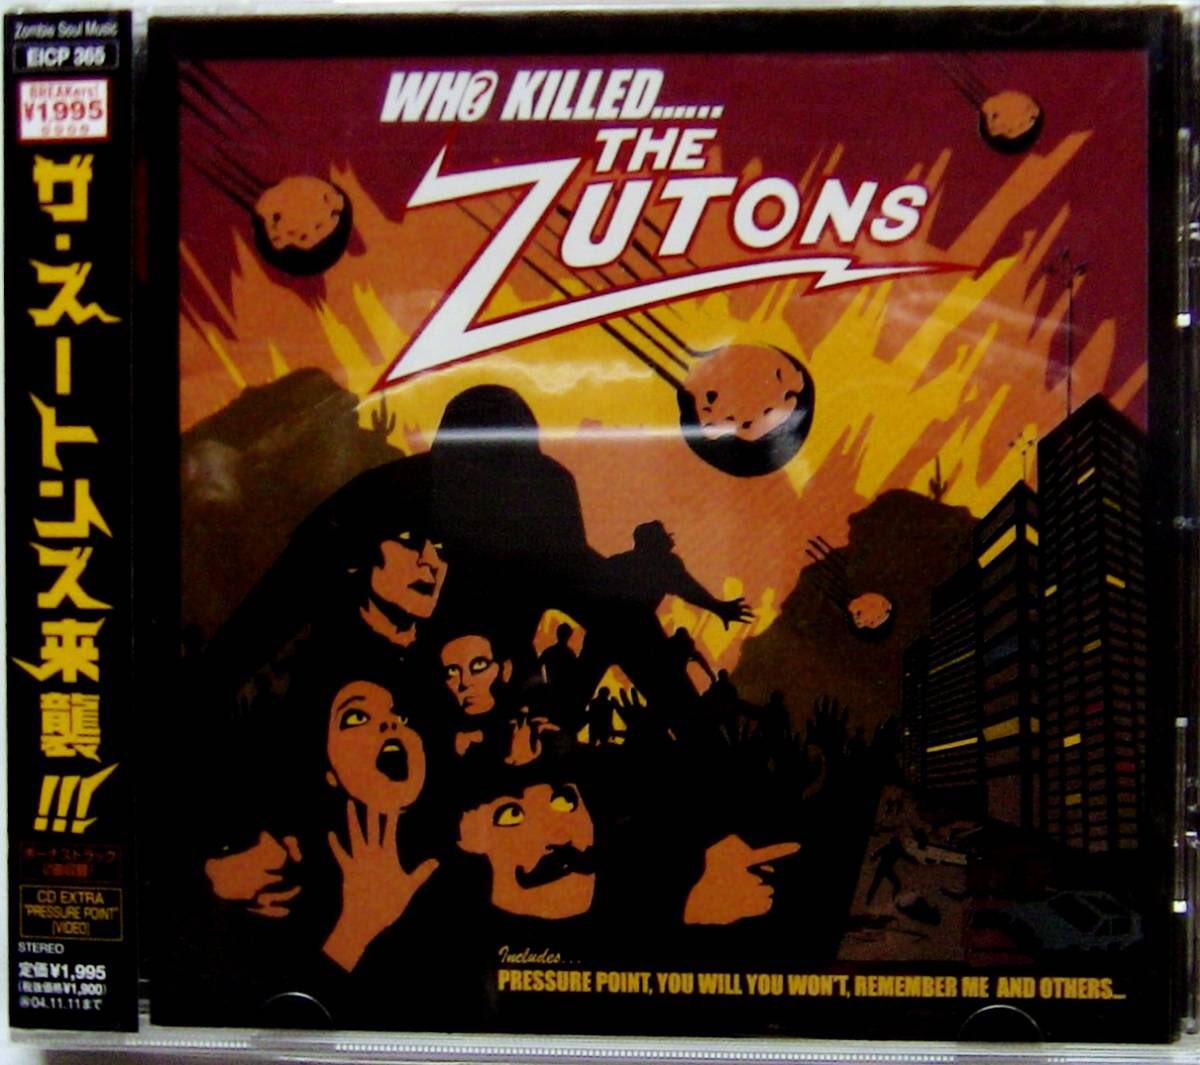 【CD】The Zutons / Who Killed...... The Zutons? ☆ #ズートンズ 
#ヤフオク
#TheZutons
#DaveMcCabe -Vo
#RussellPritchard -Ba
#SeanPayne -Dr
#AbiHarding -Sax
#PaulMolloy -G
#BoyanChowdhury -G
#IanBroudie(#TheLightningSeeds) -Producer page.auctions.yahoo.co.jp/jp/auction/k30…